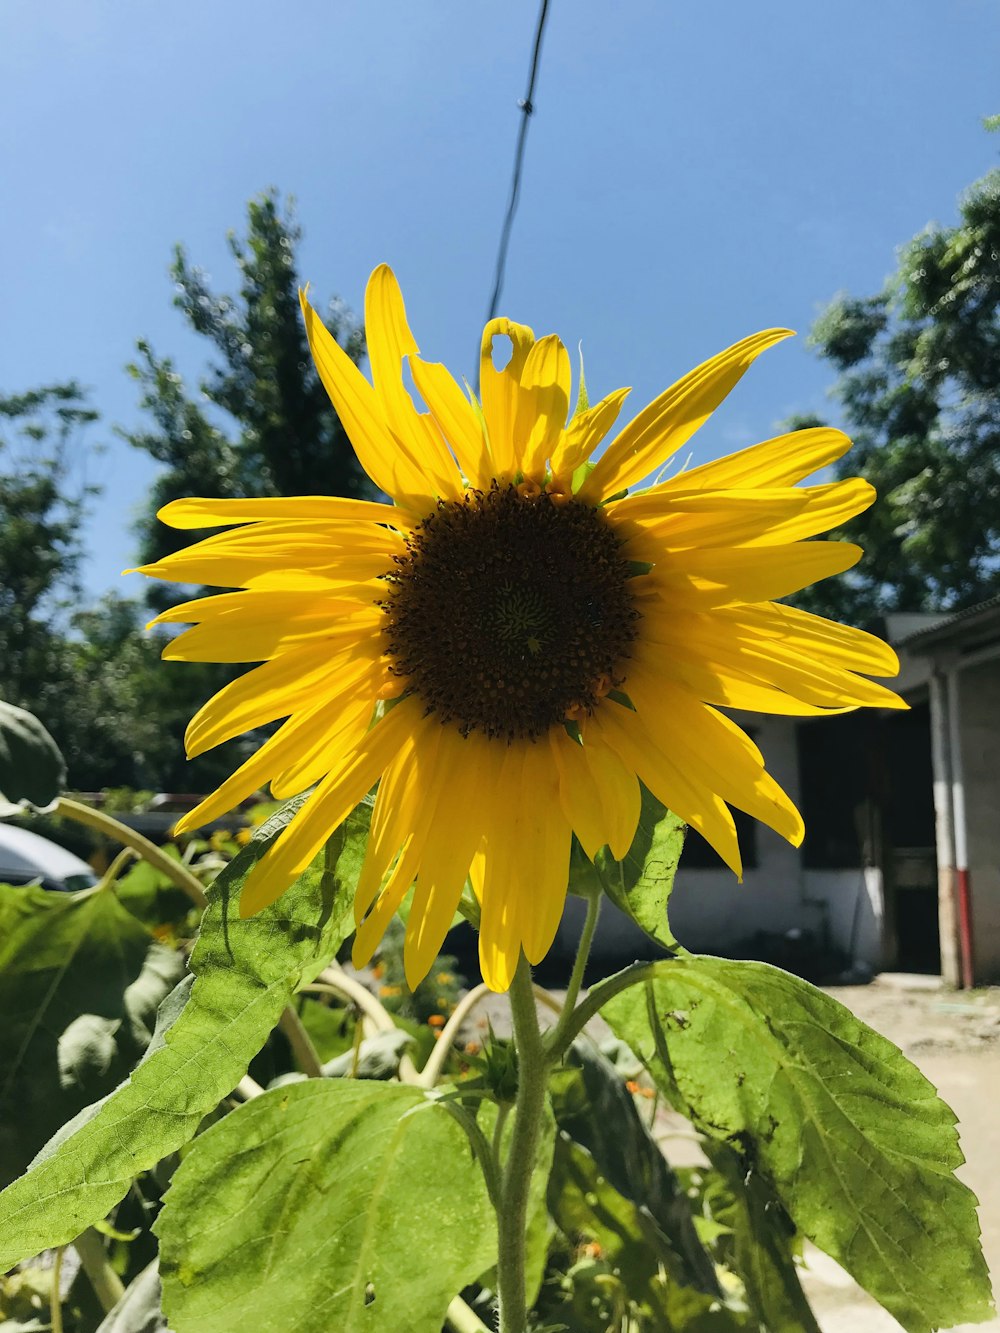 a large sunflower in a field with a house in the background